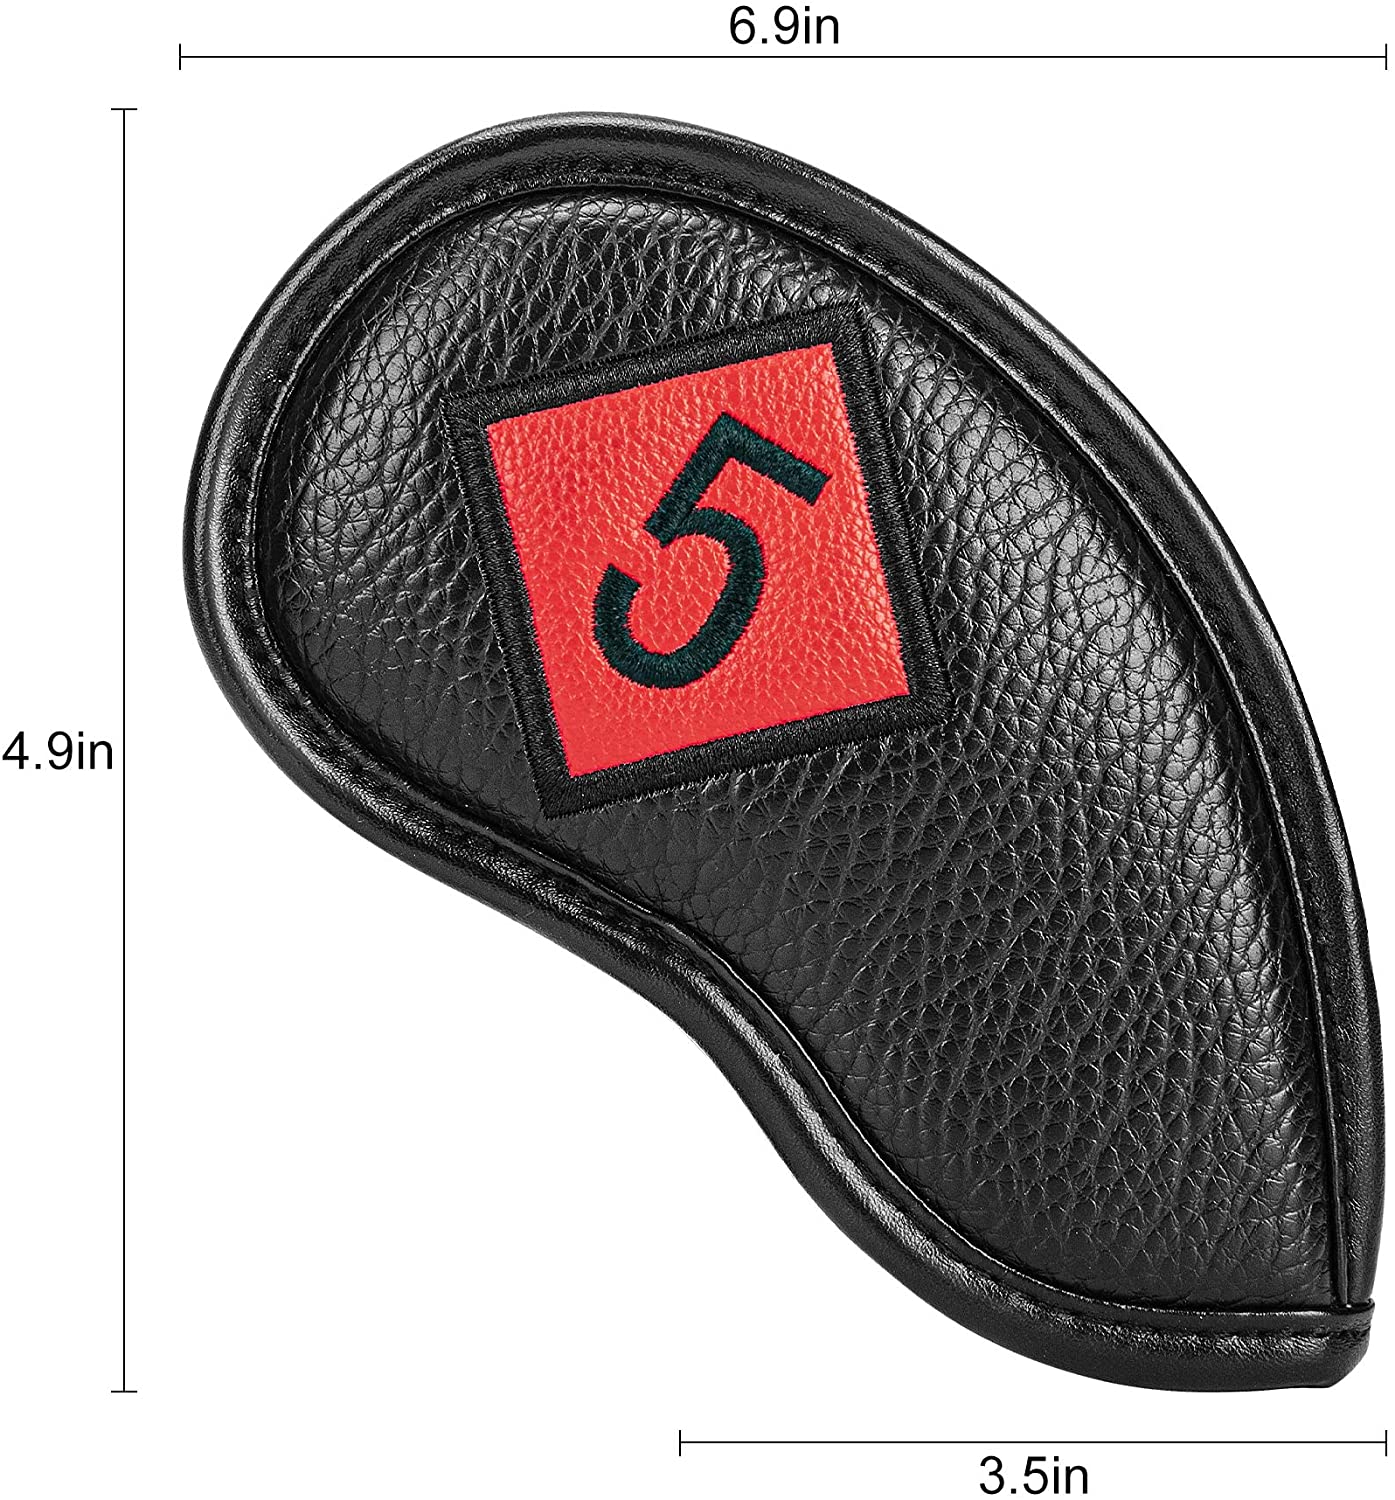 Golf Iron Head Covers 11pcs Thicken PU Leather Soft Embroideried Classic Black Edging Right Handed Closely Protector Waterproof Durable Fit Most Brands（4—9 Pw Aw Sw Lw X）